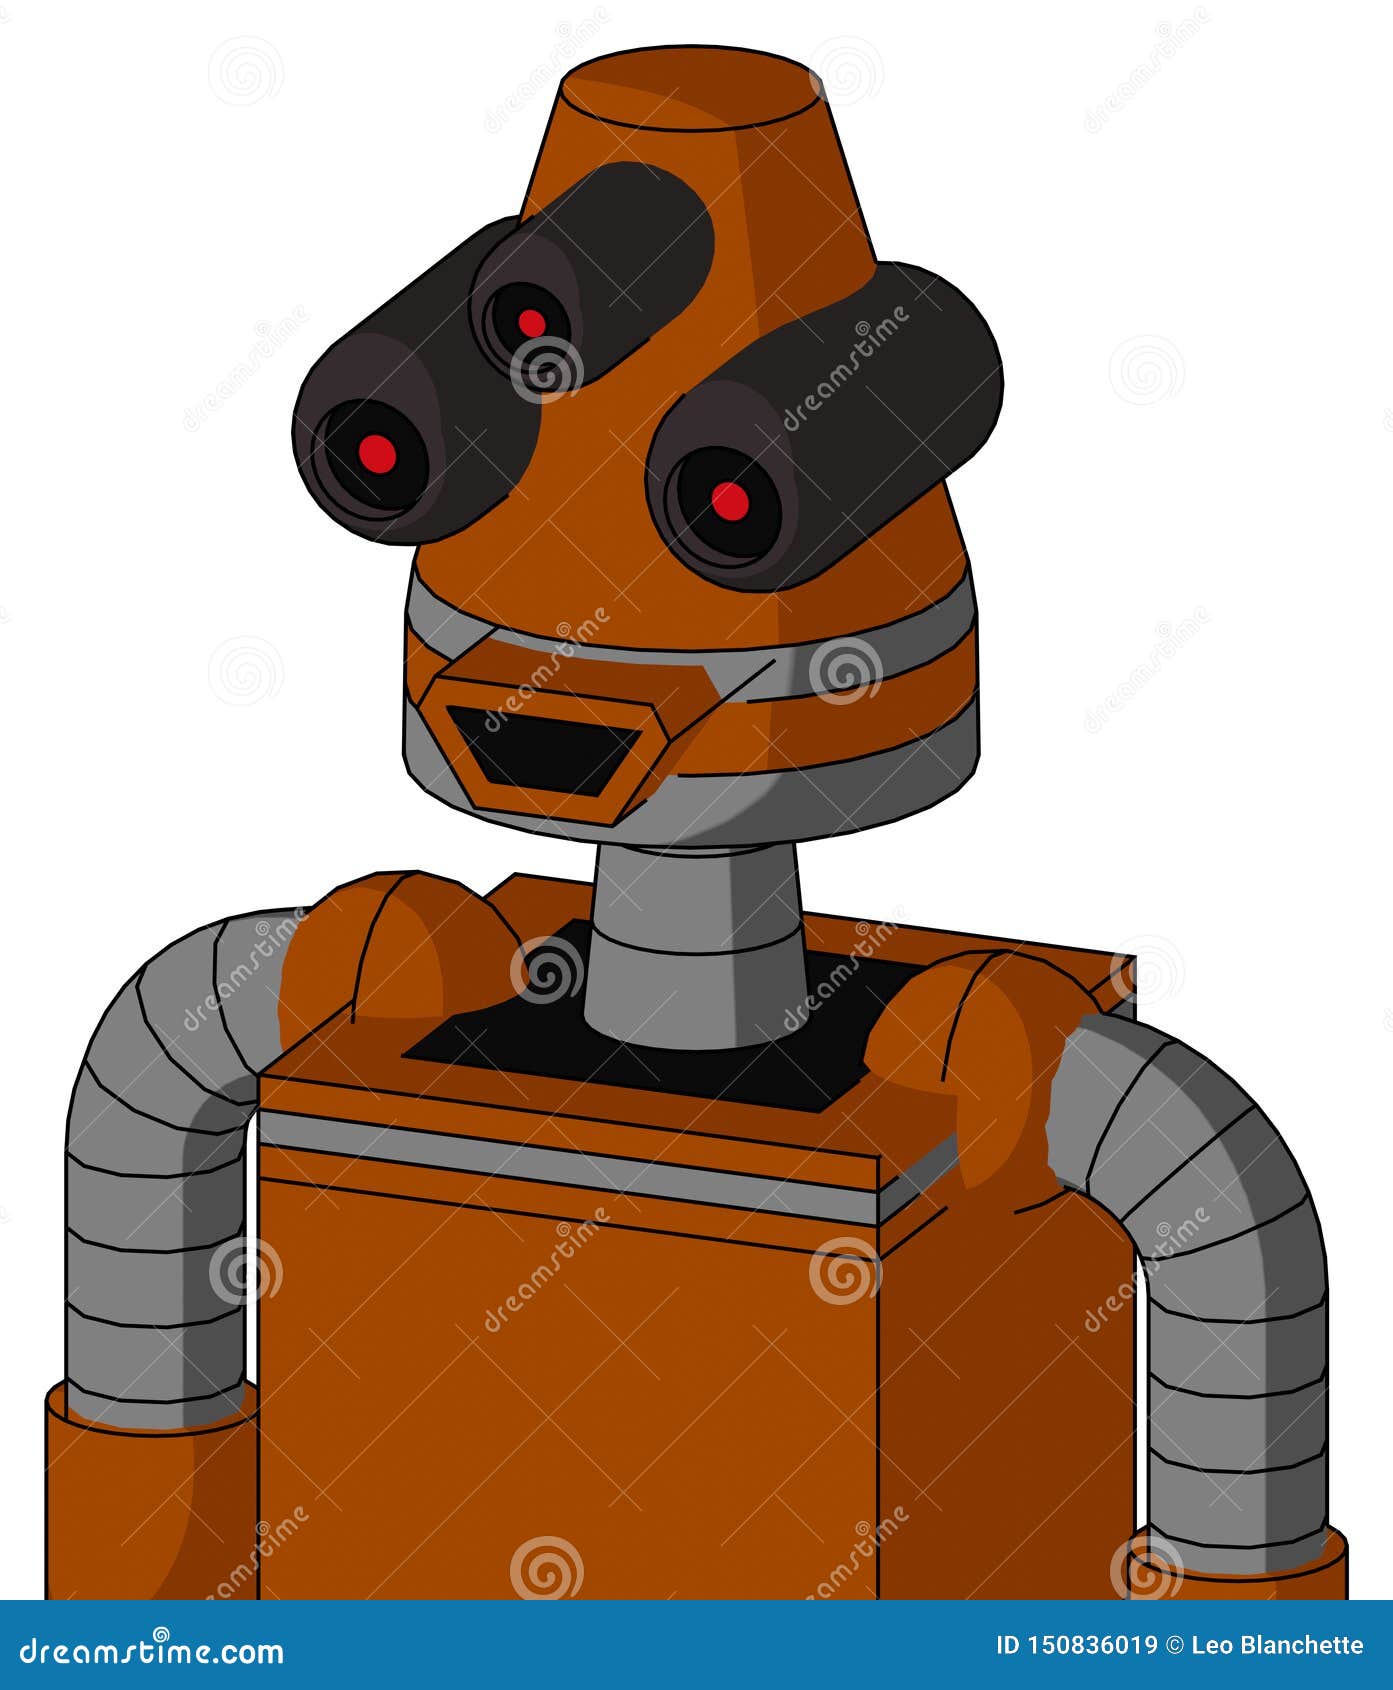 redish-orange mech with cone head and happy mouth and three-eyed